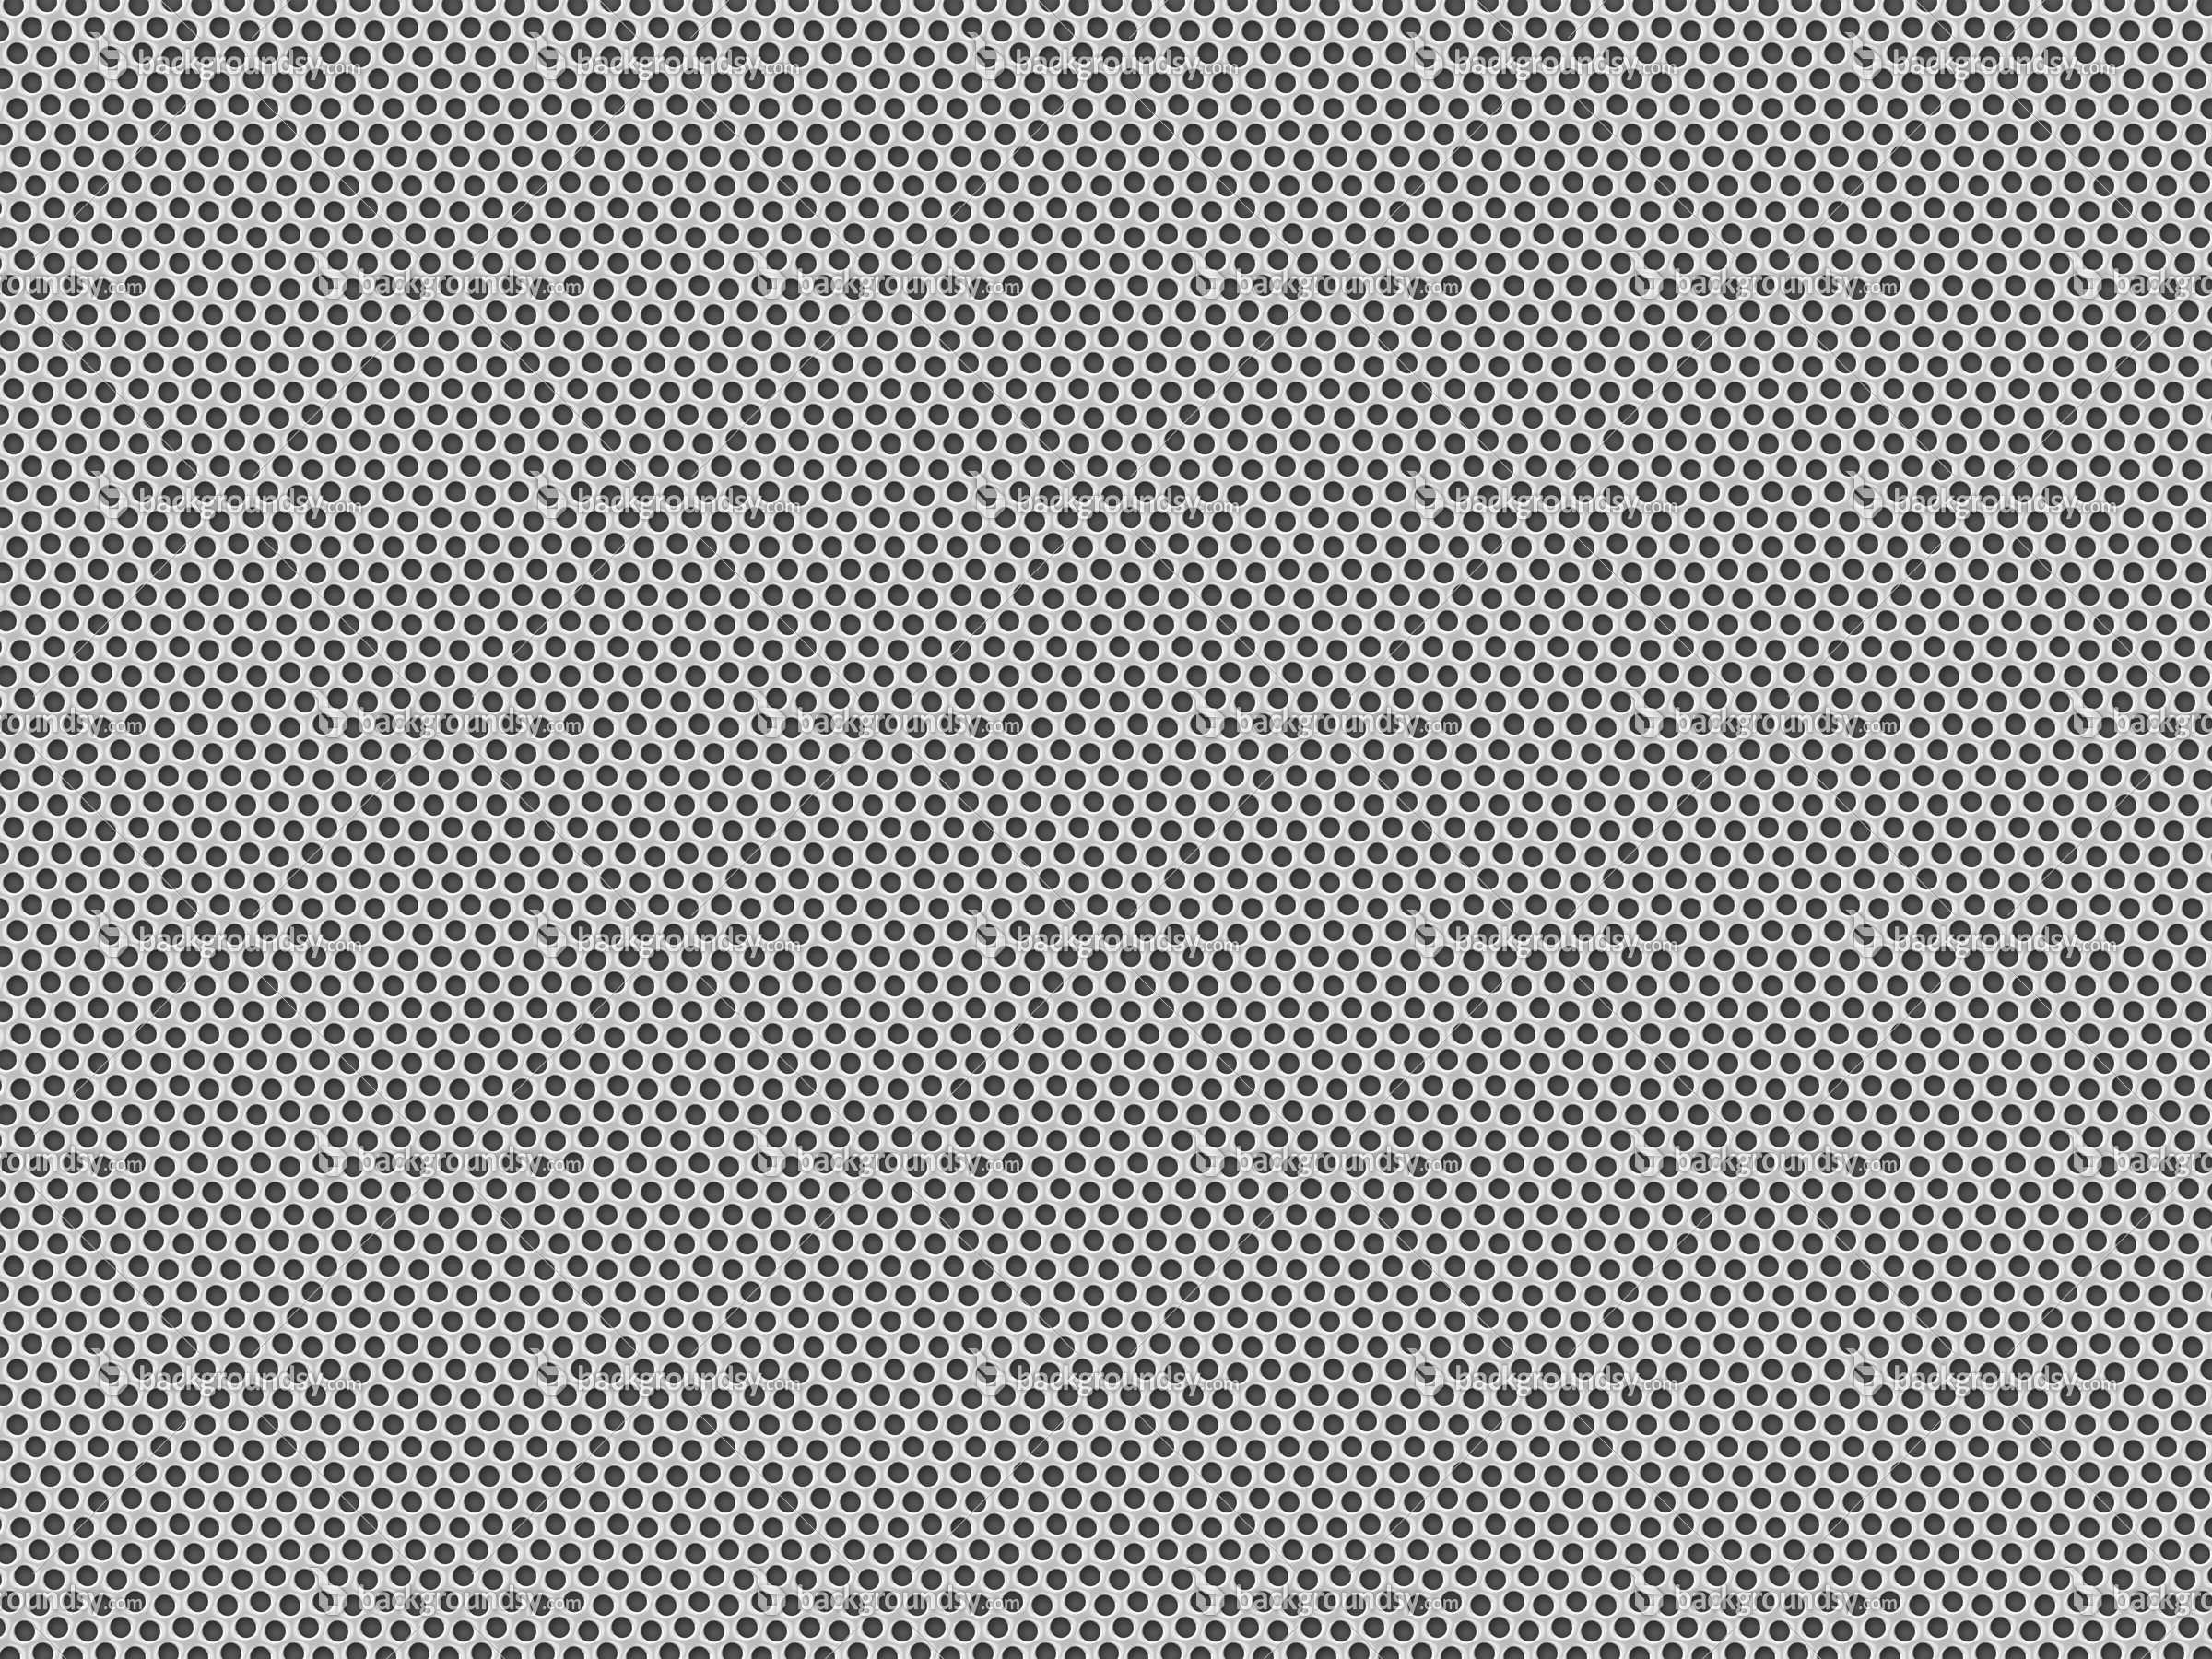 Perforated aluminum plate | Backgroundsy.com